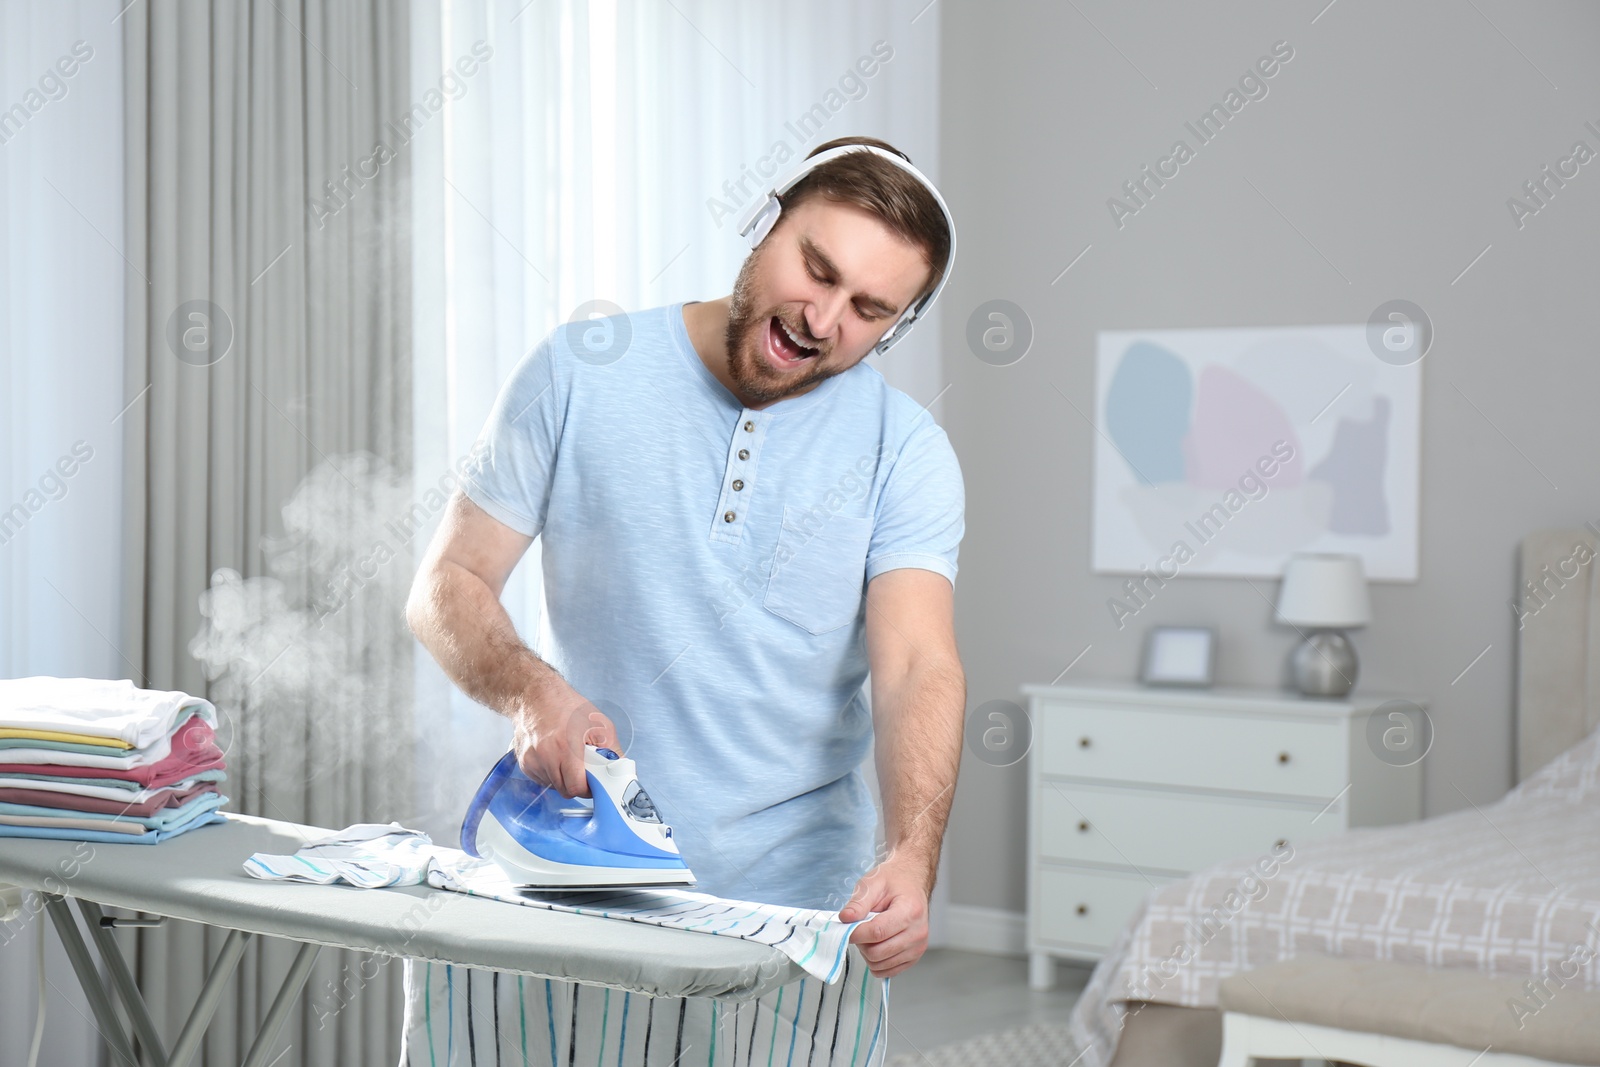 Photo of Man listening to music while ironing at home